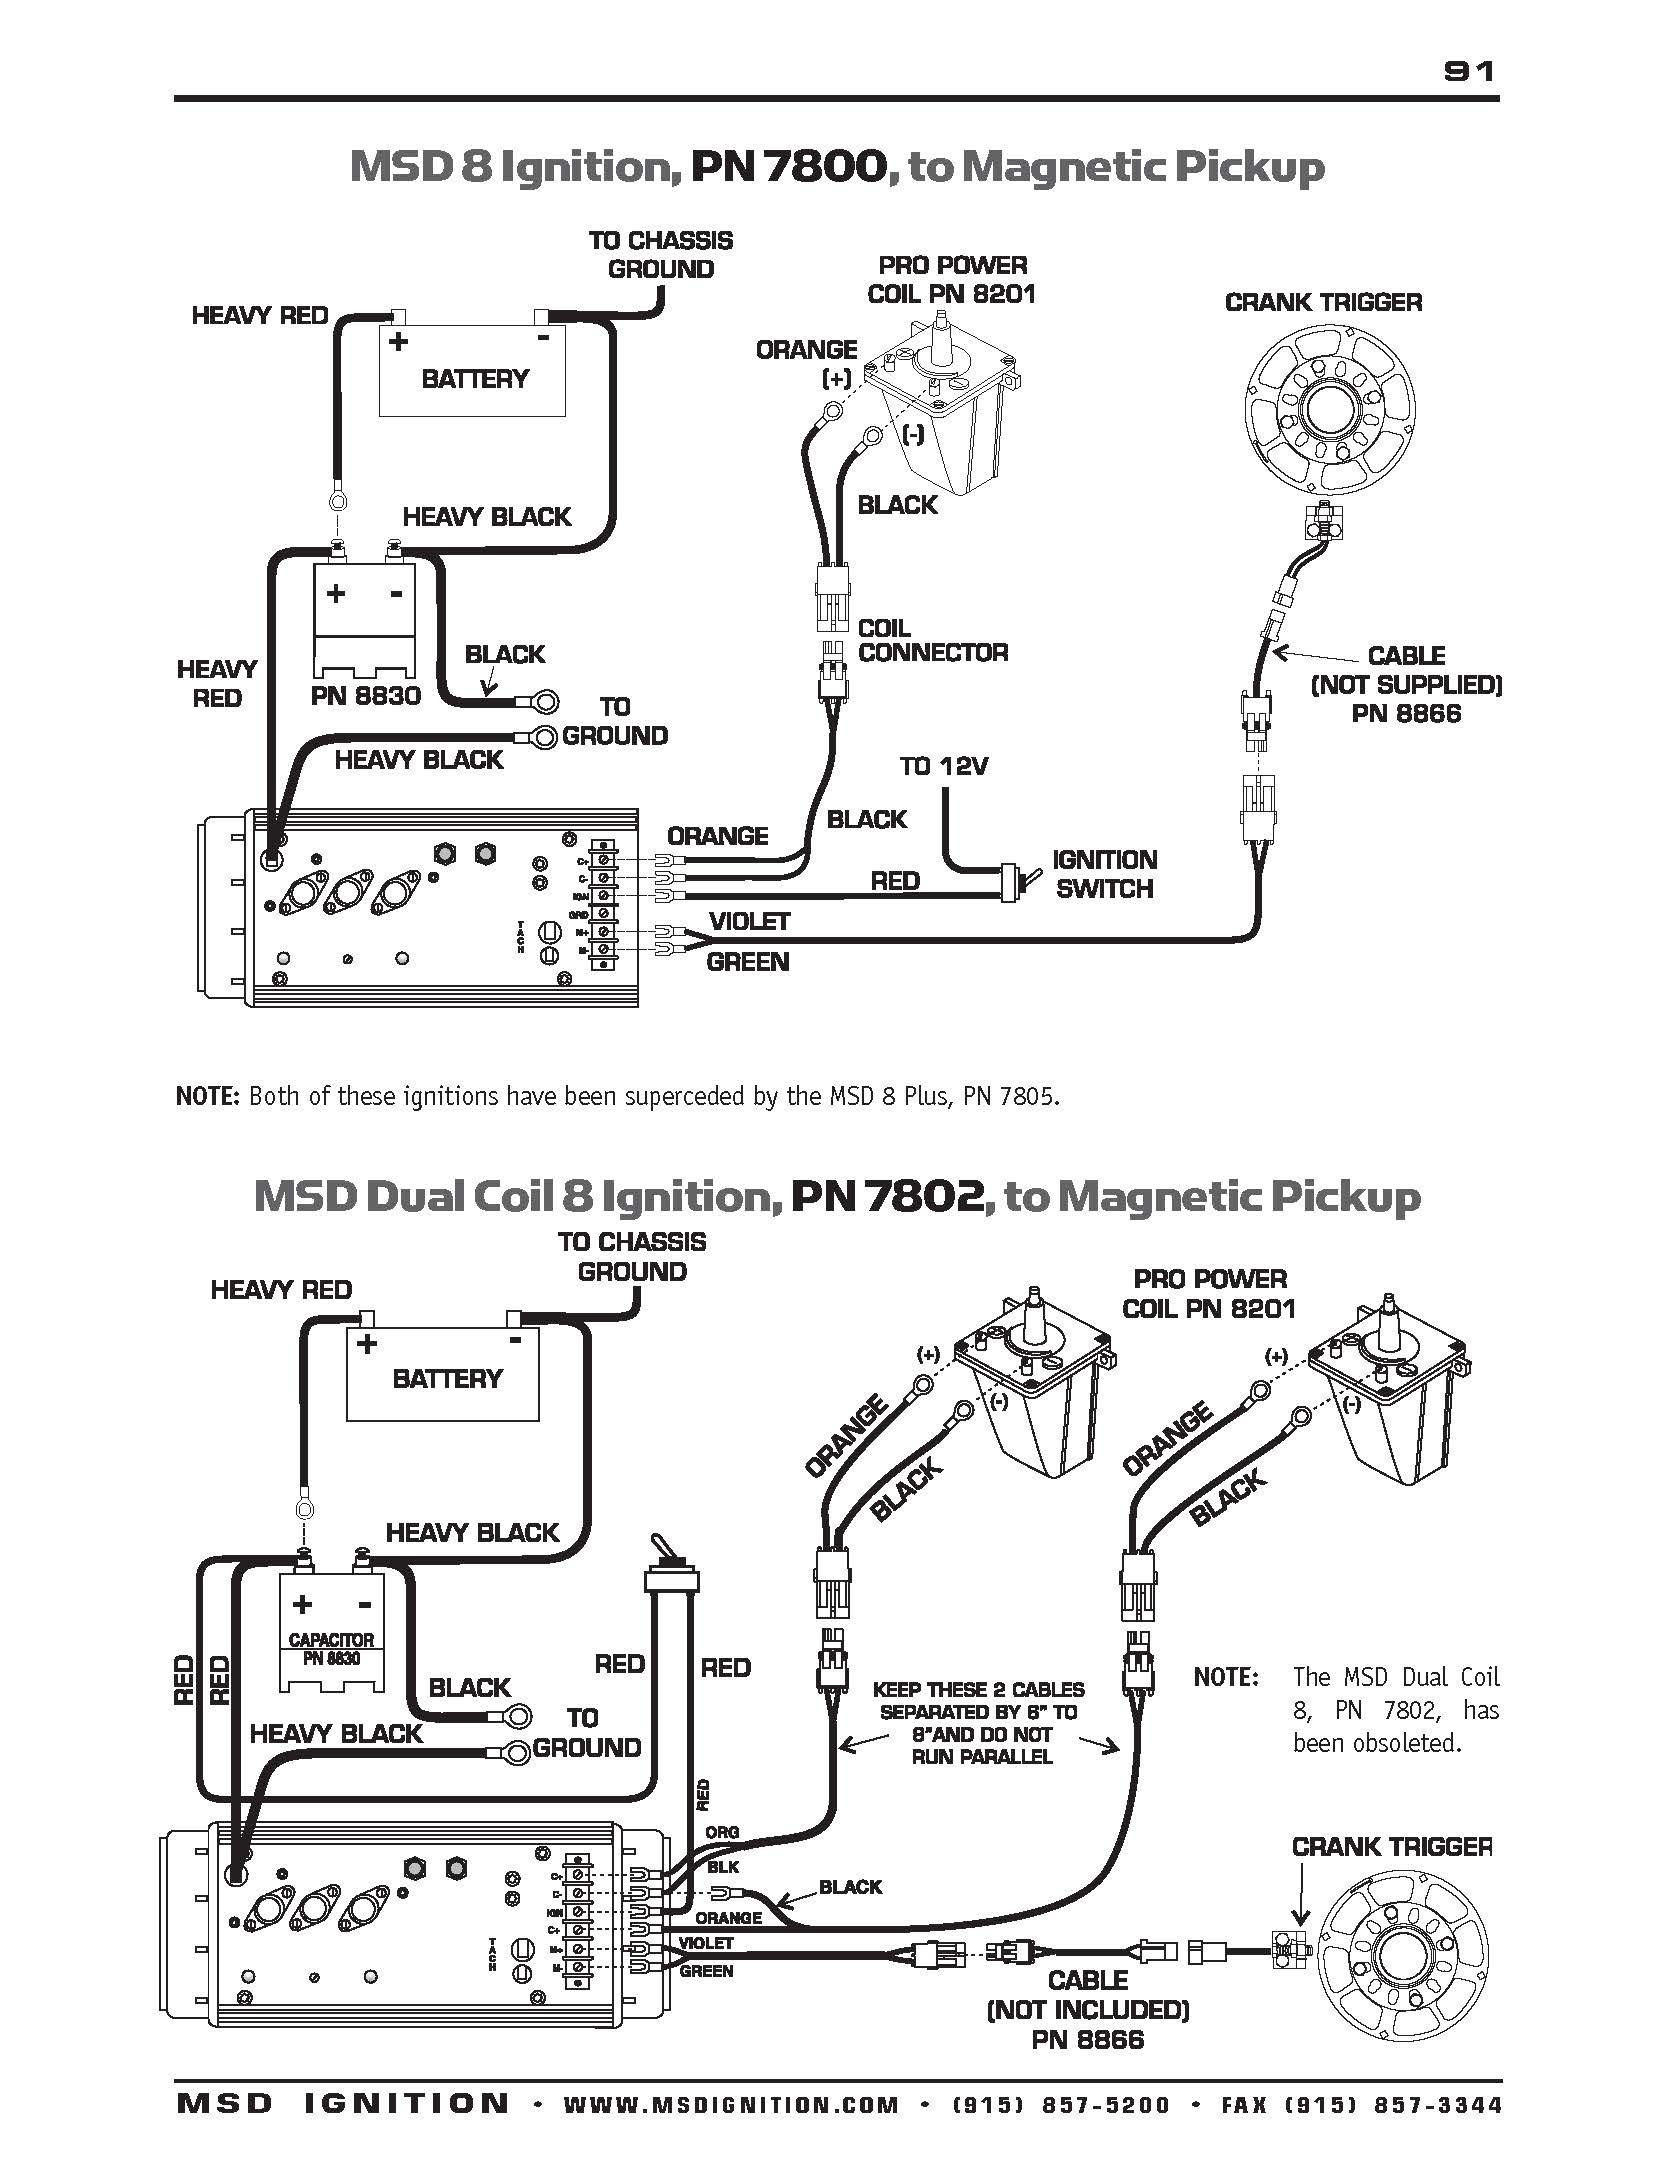 Msd Ignition System Wiring Diagram Save Msd Ignition Wiring Diagram Hei Lukaszmira And Roc Grp